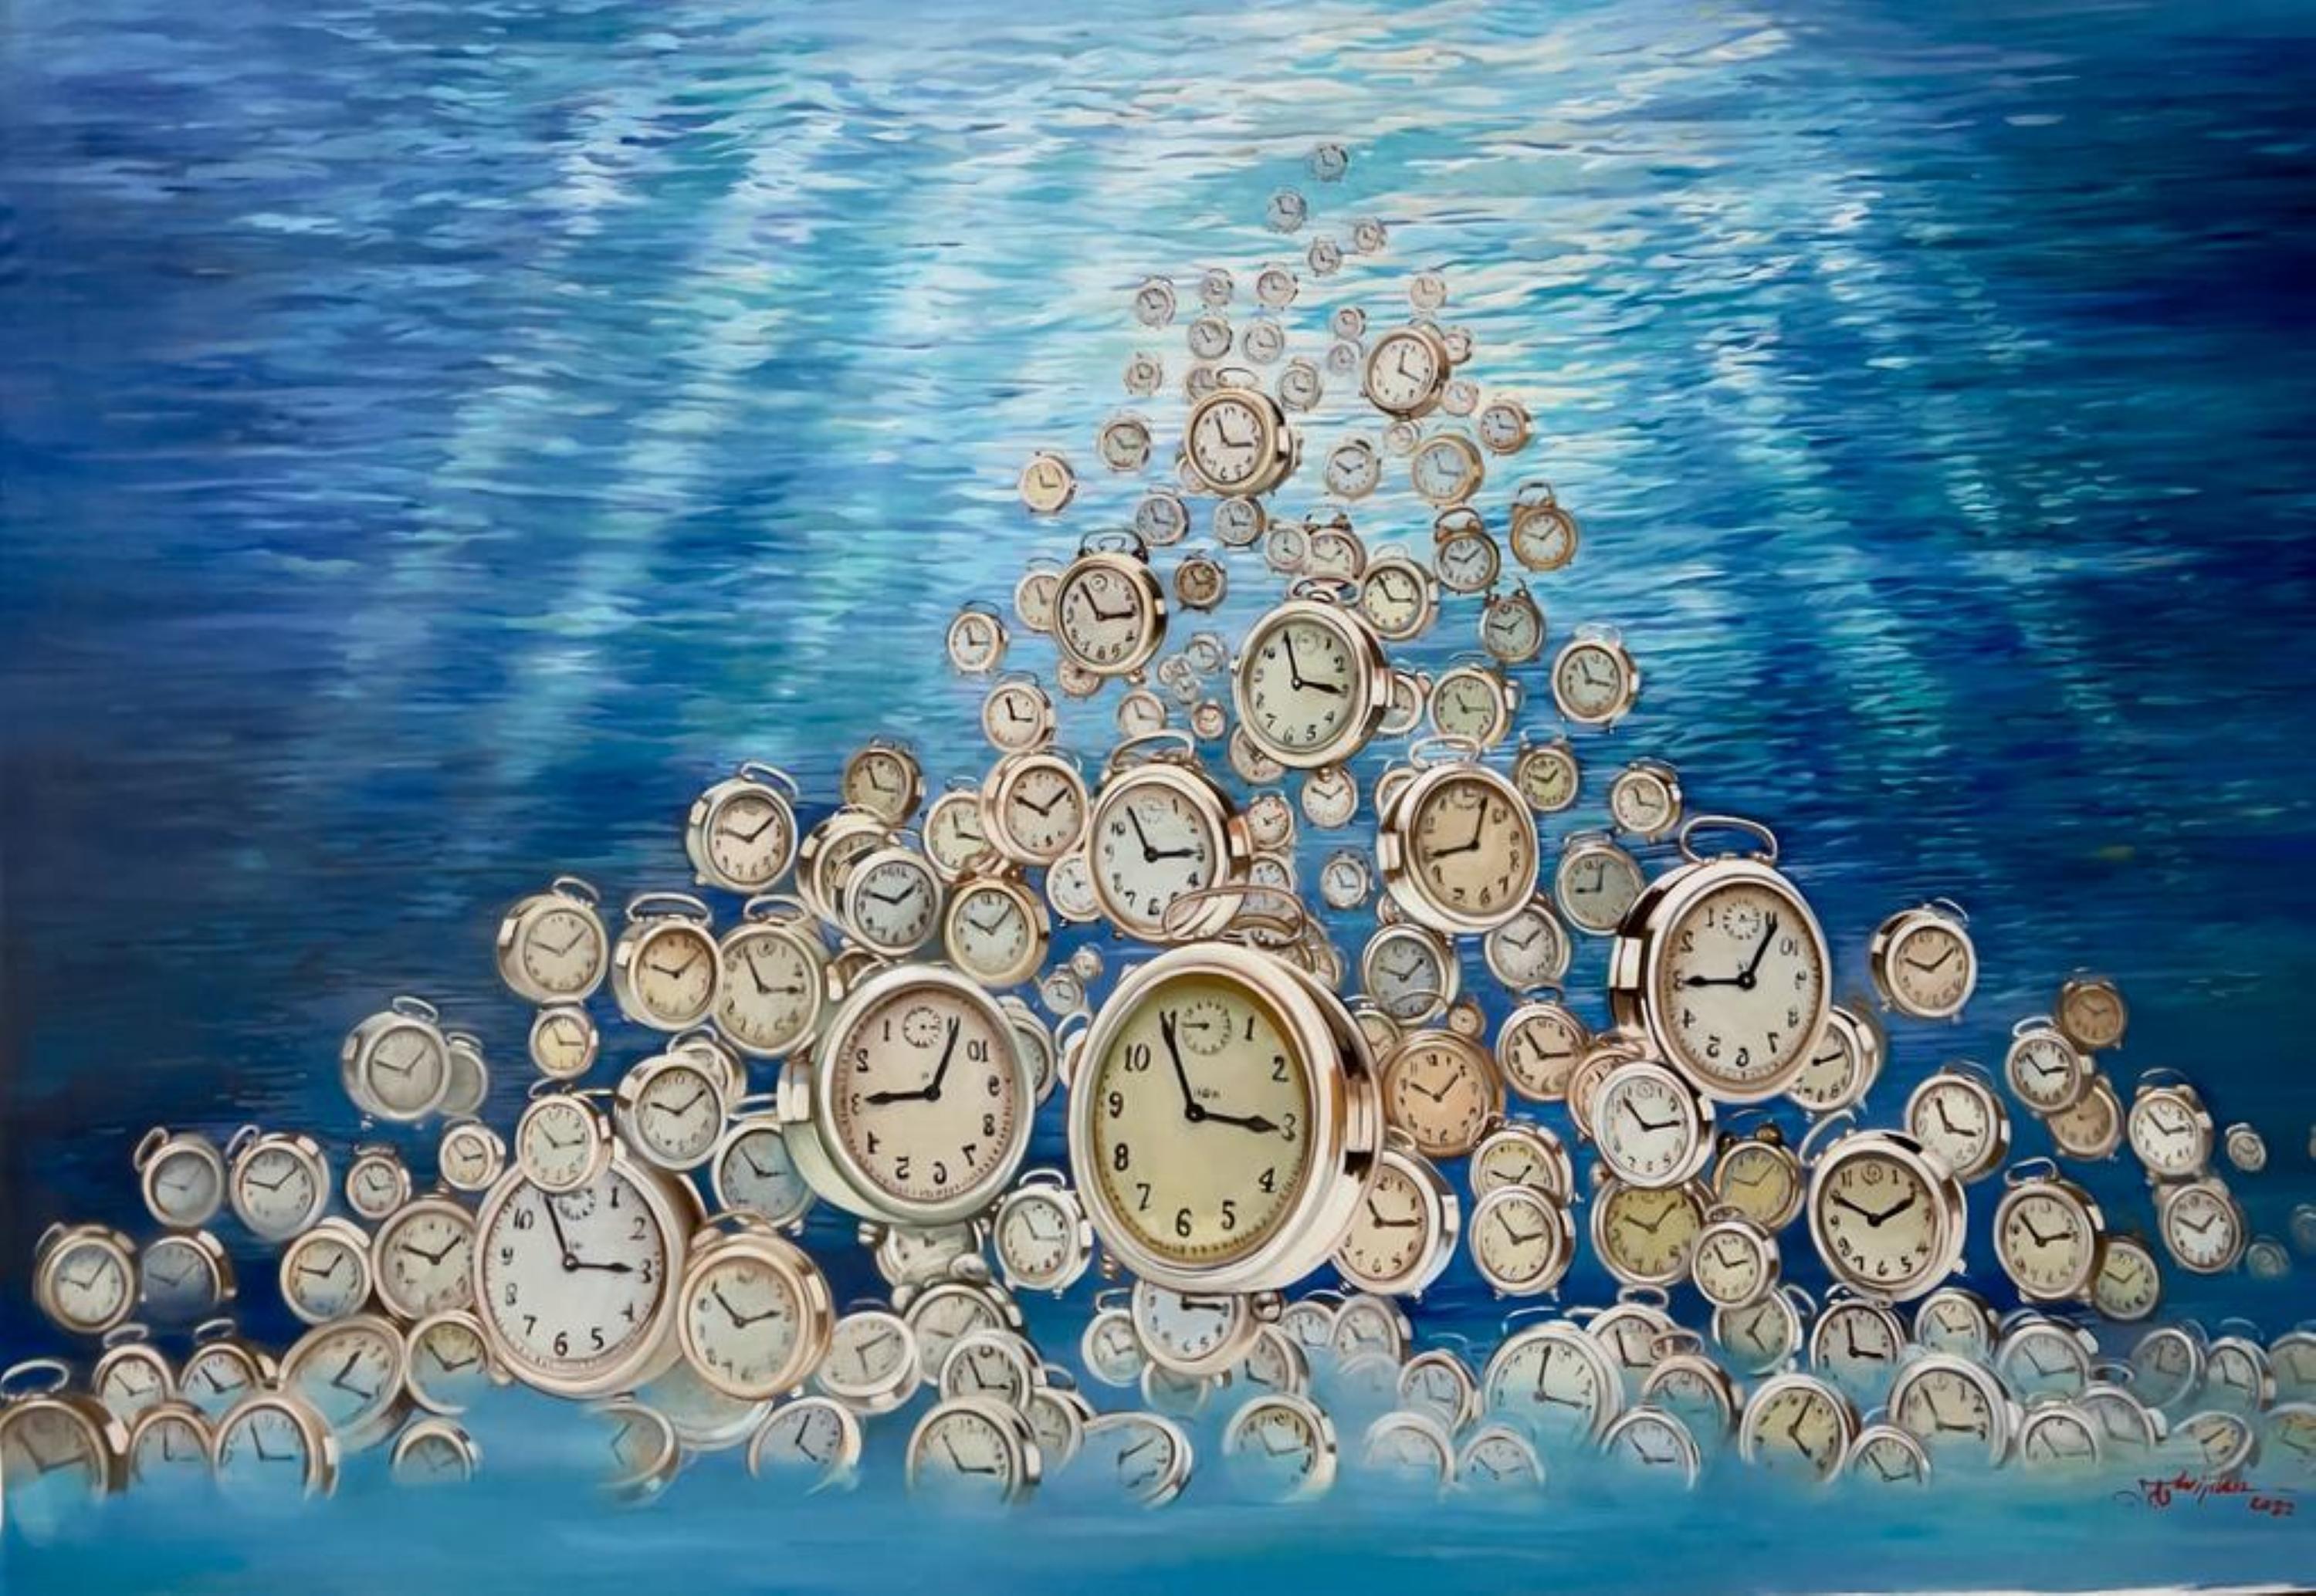 The Ticking sound in ocean - Painting by HANI NAJI